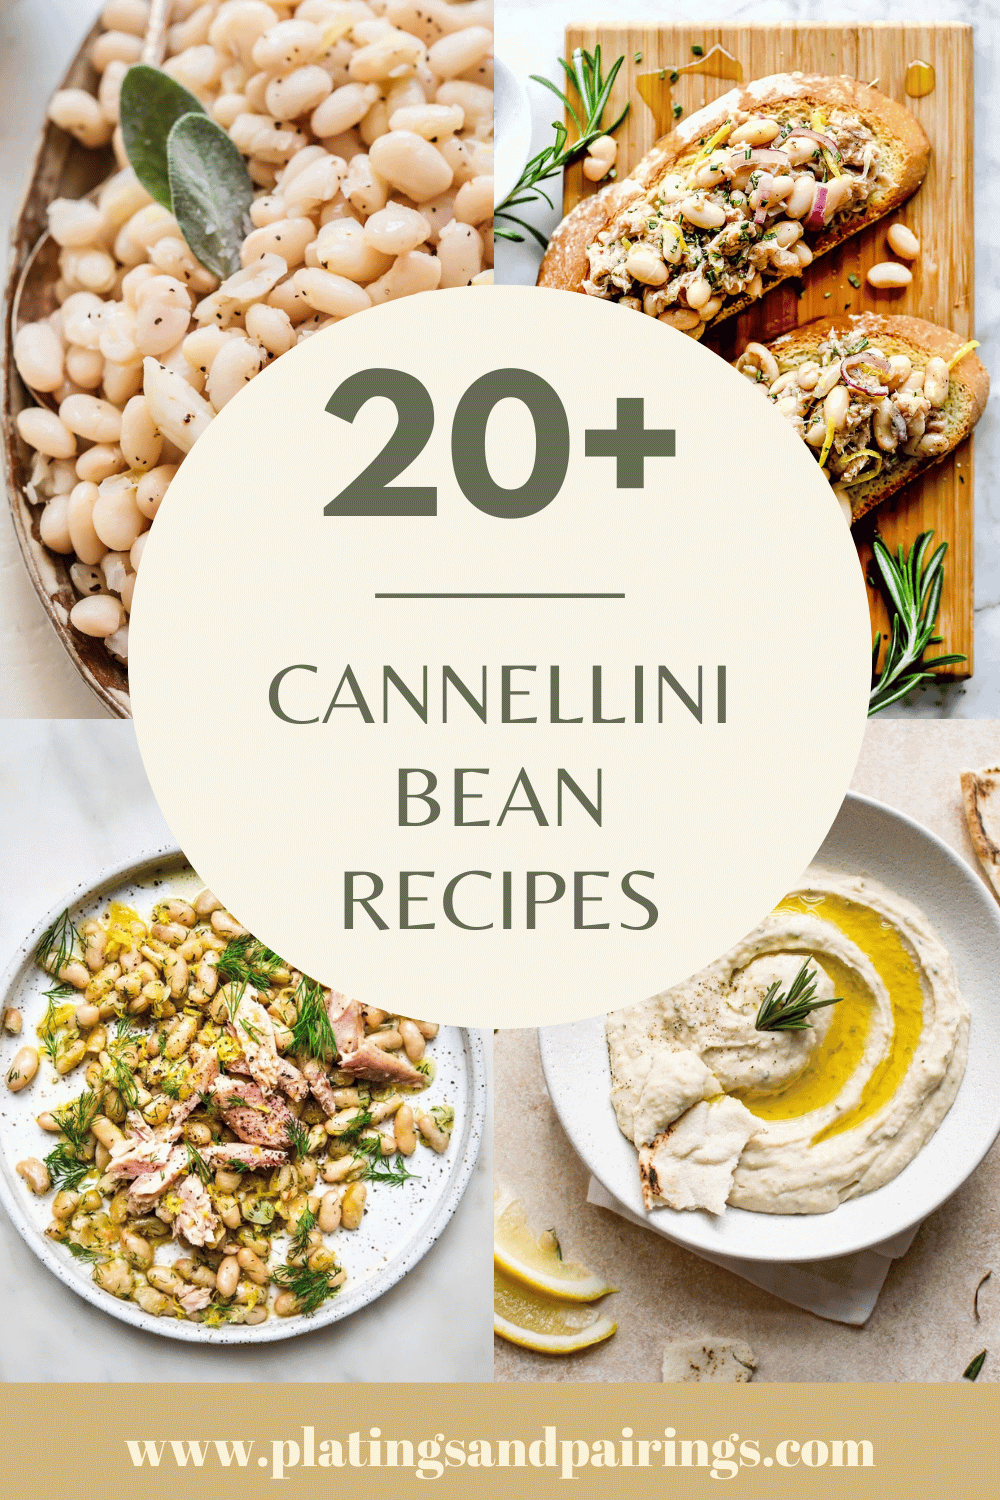 Collage of cannellini bean recipes with text overlay.